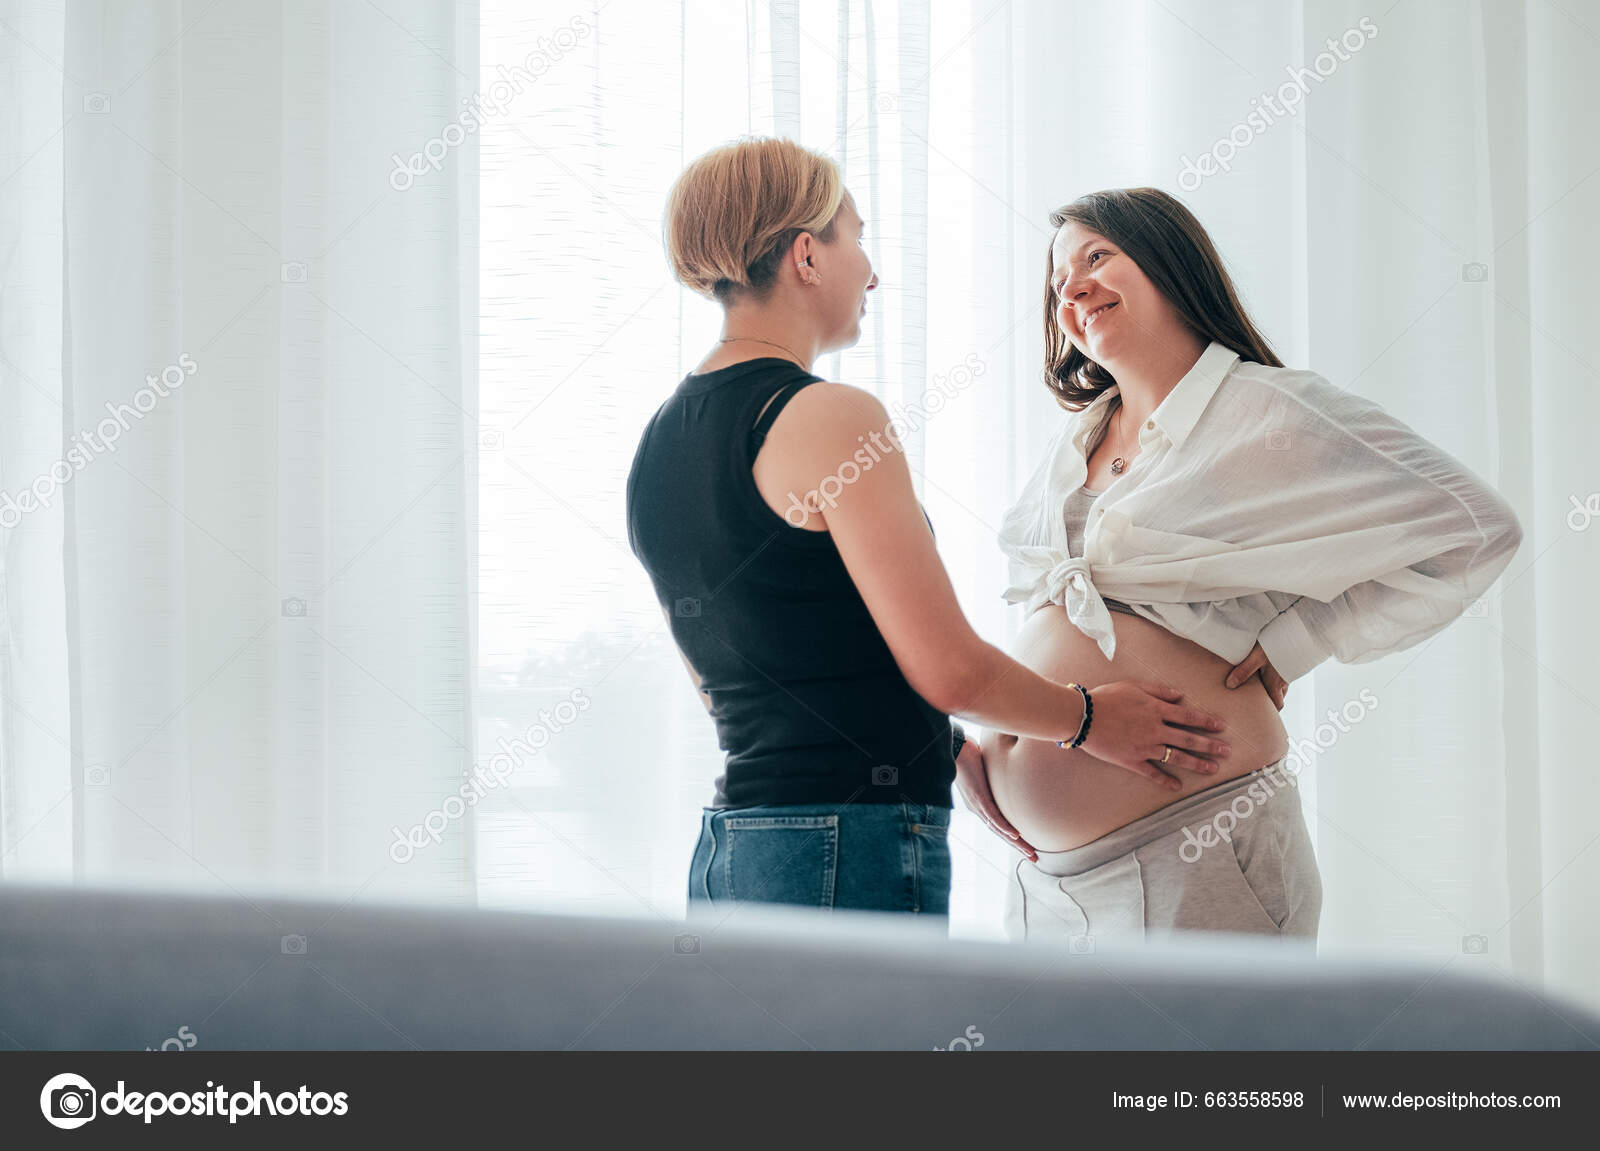 Smiling Young Woman Tender Touching Partners Female Pregnant Belly Same Stock Photo by ©solovyova 663558598 pic